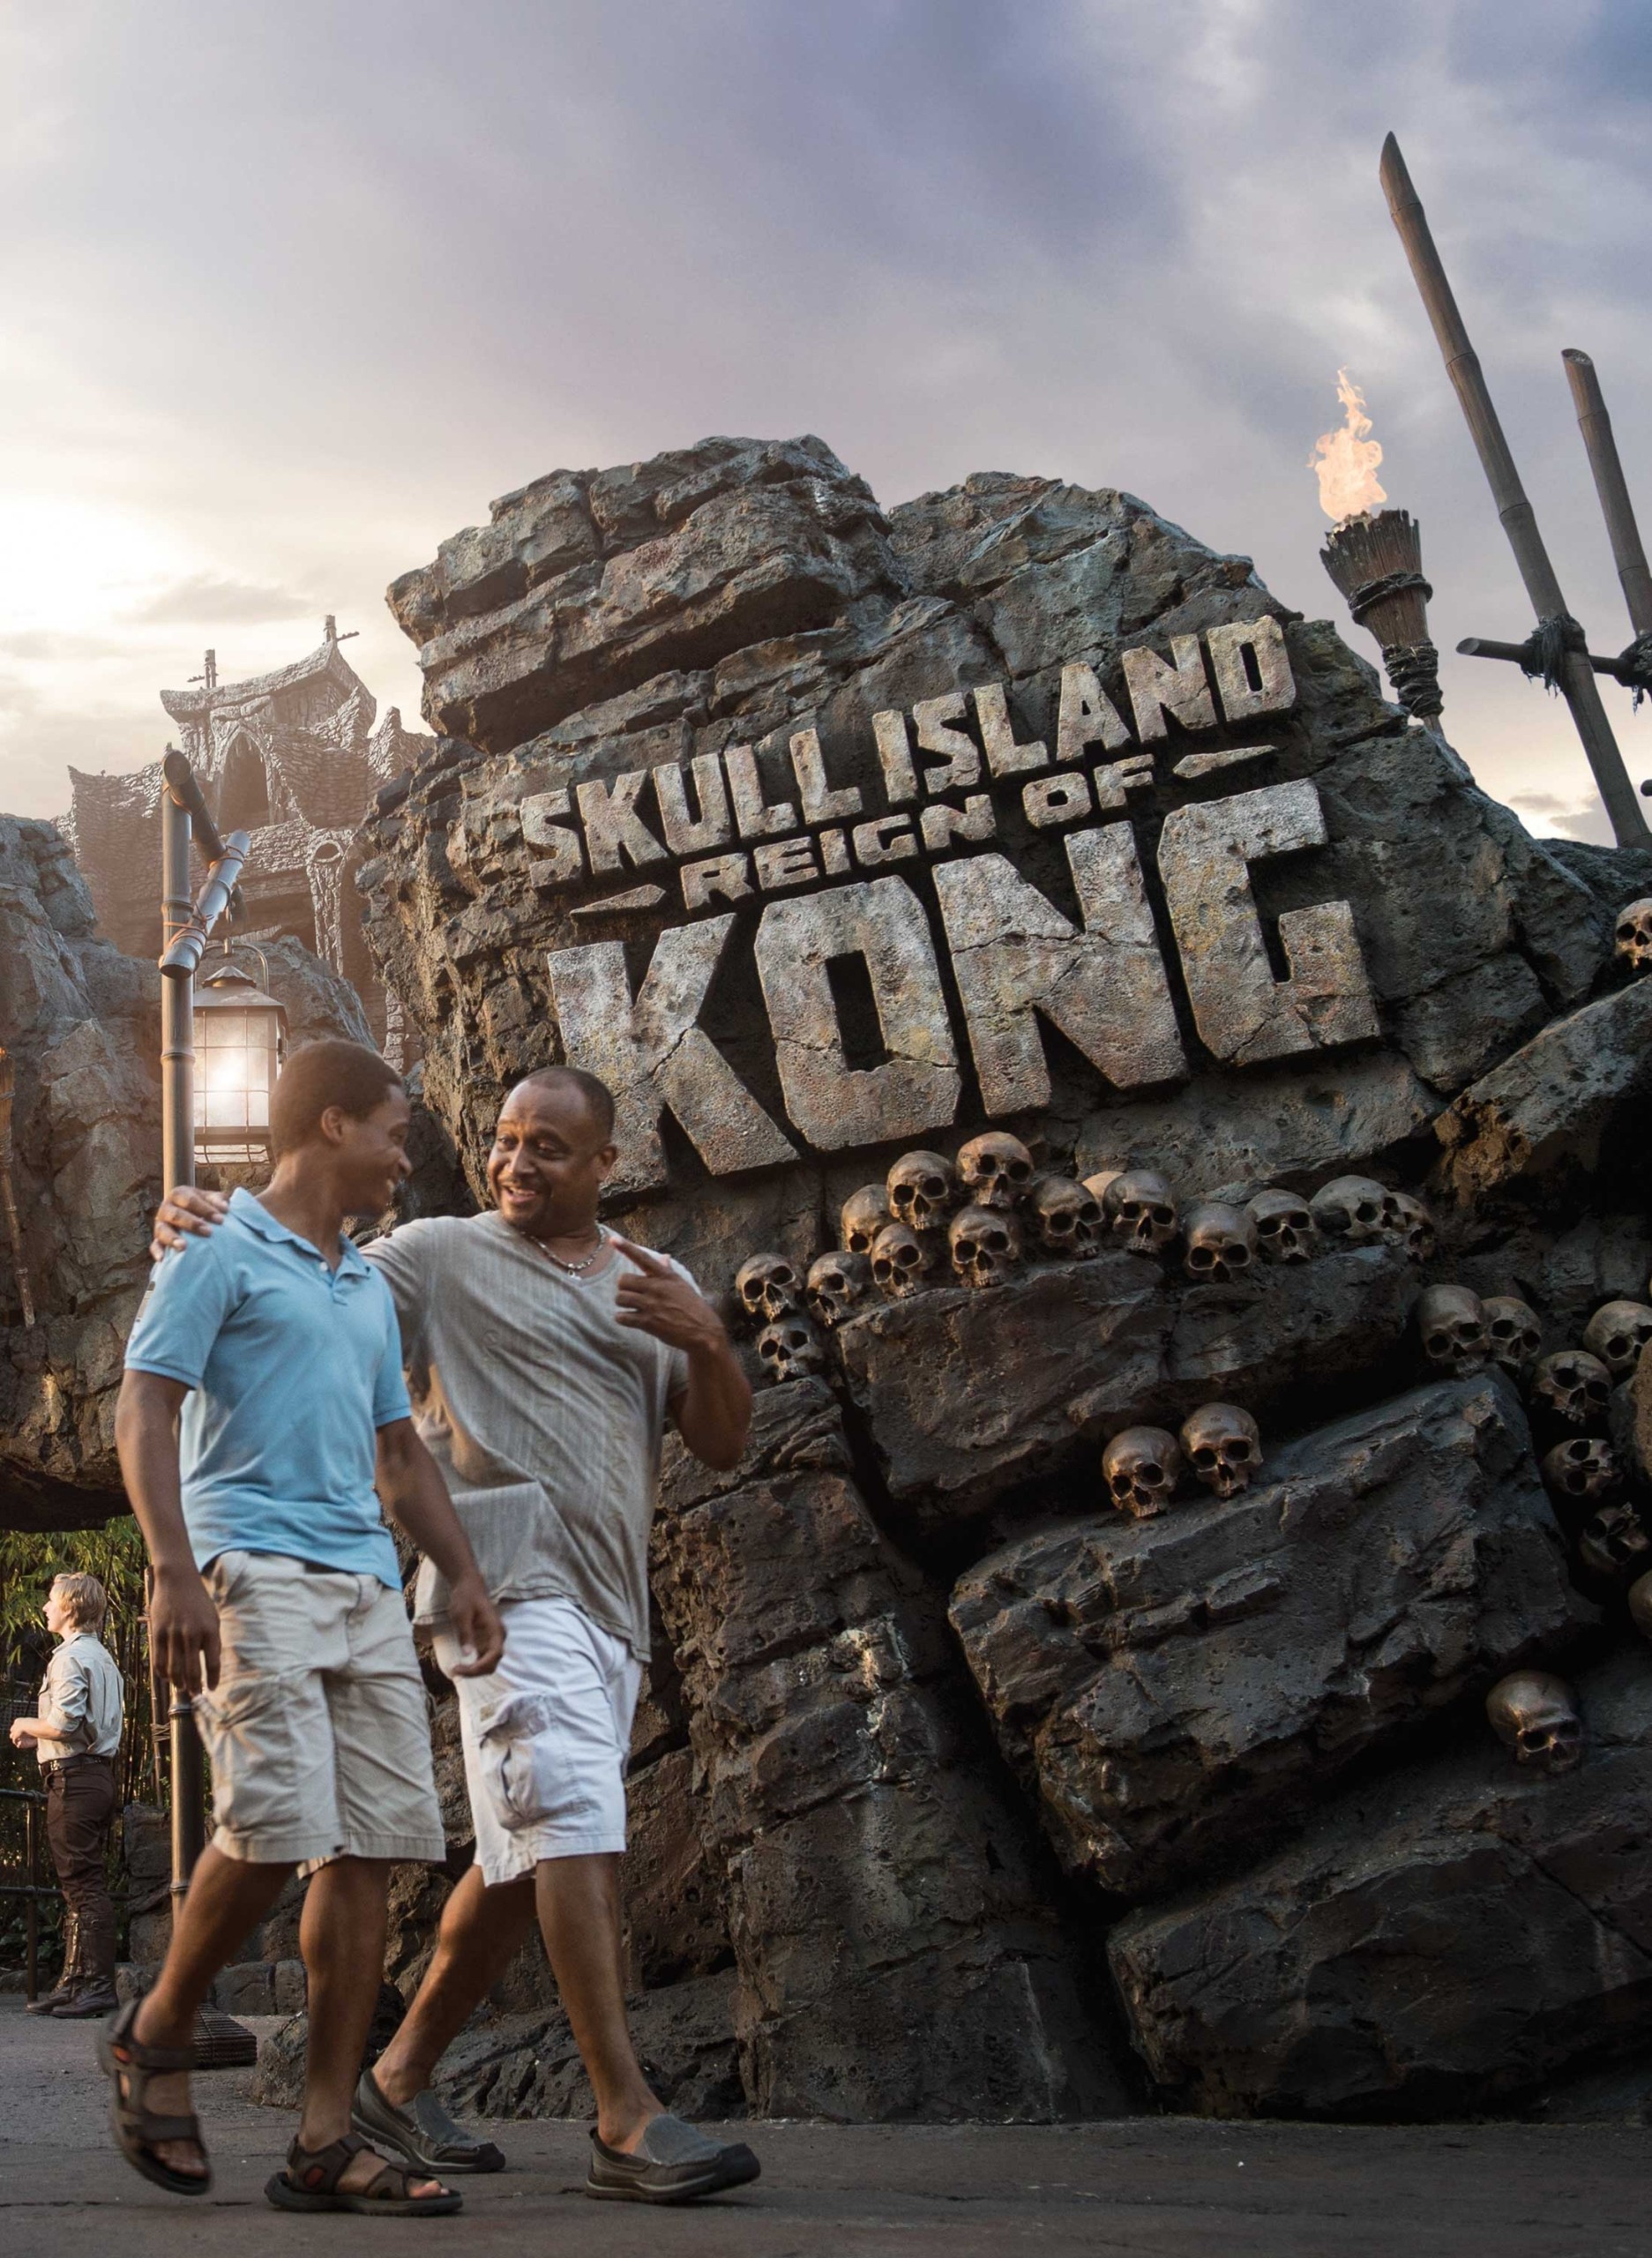 A father an his teenage sun outside the ride sign for the Skull Island, Reign of Kong ride